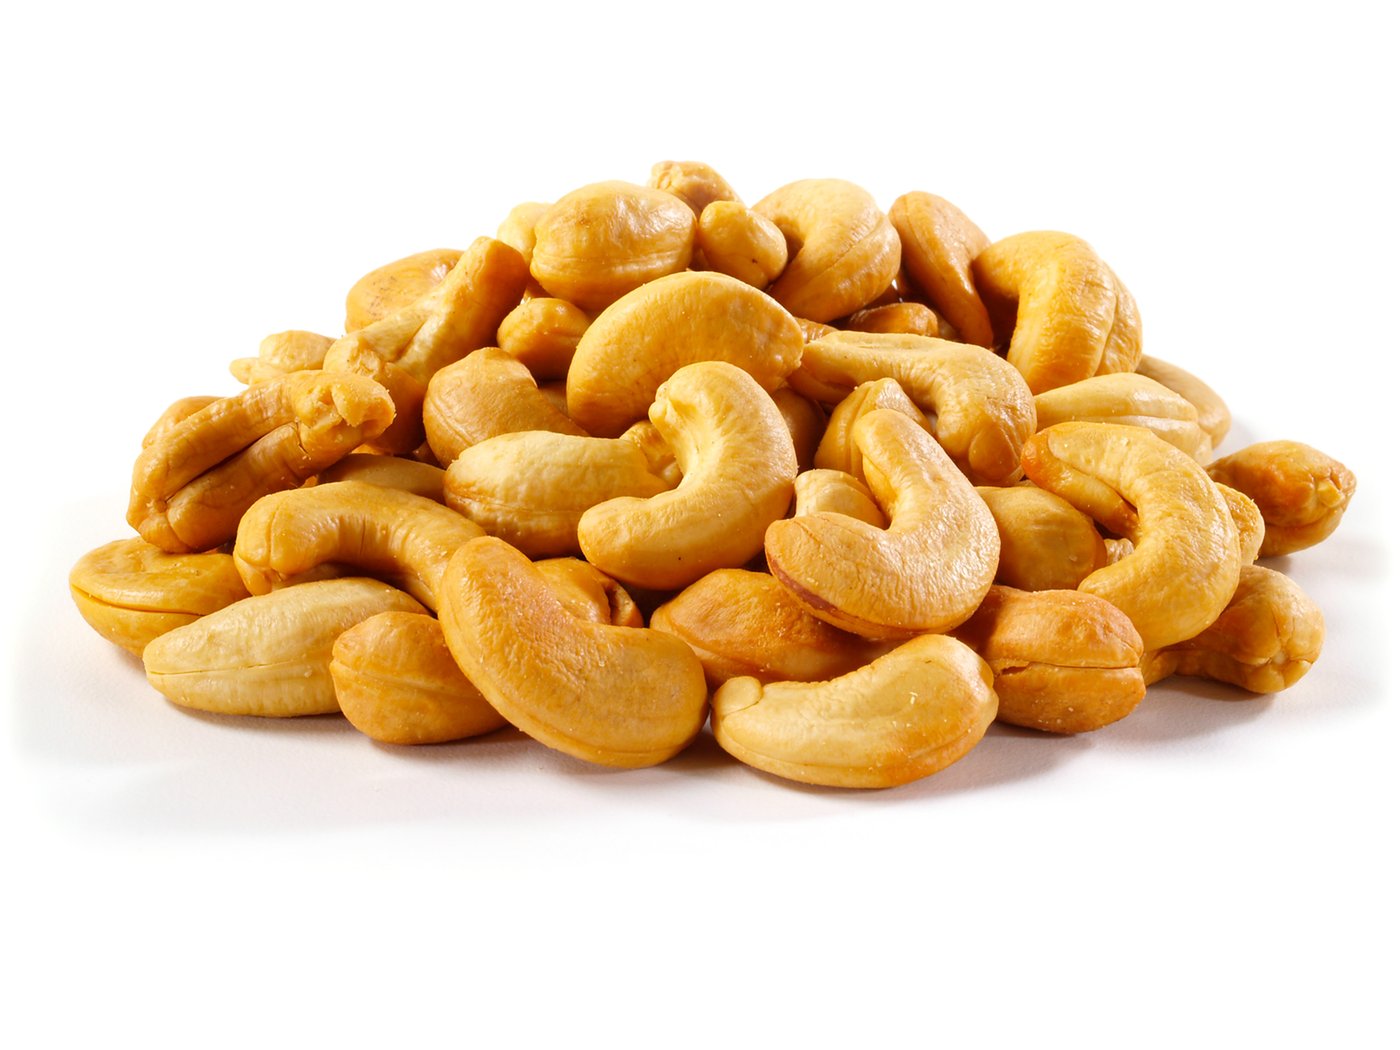 Dry Roasted Cashews (Unsalted) image zoom